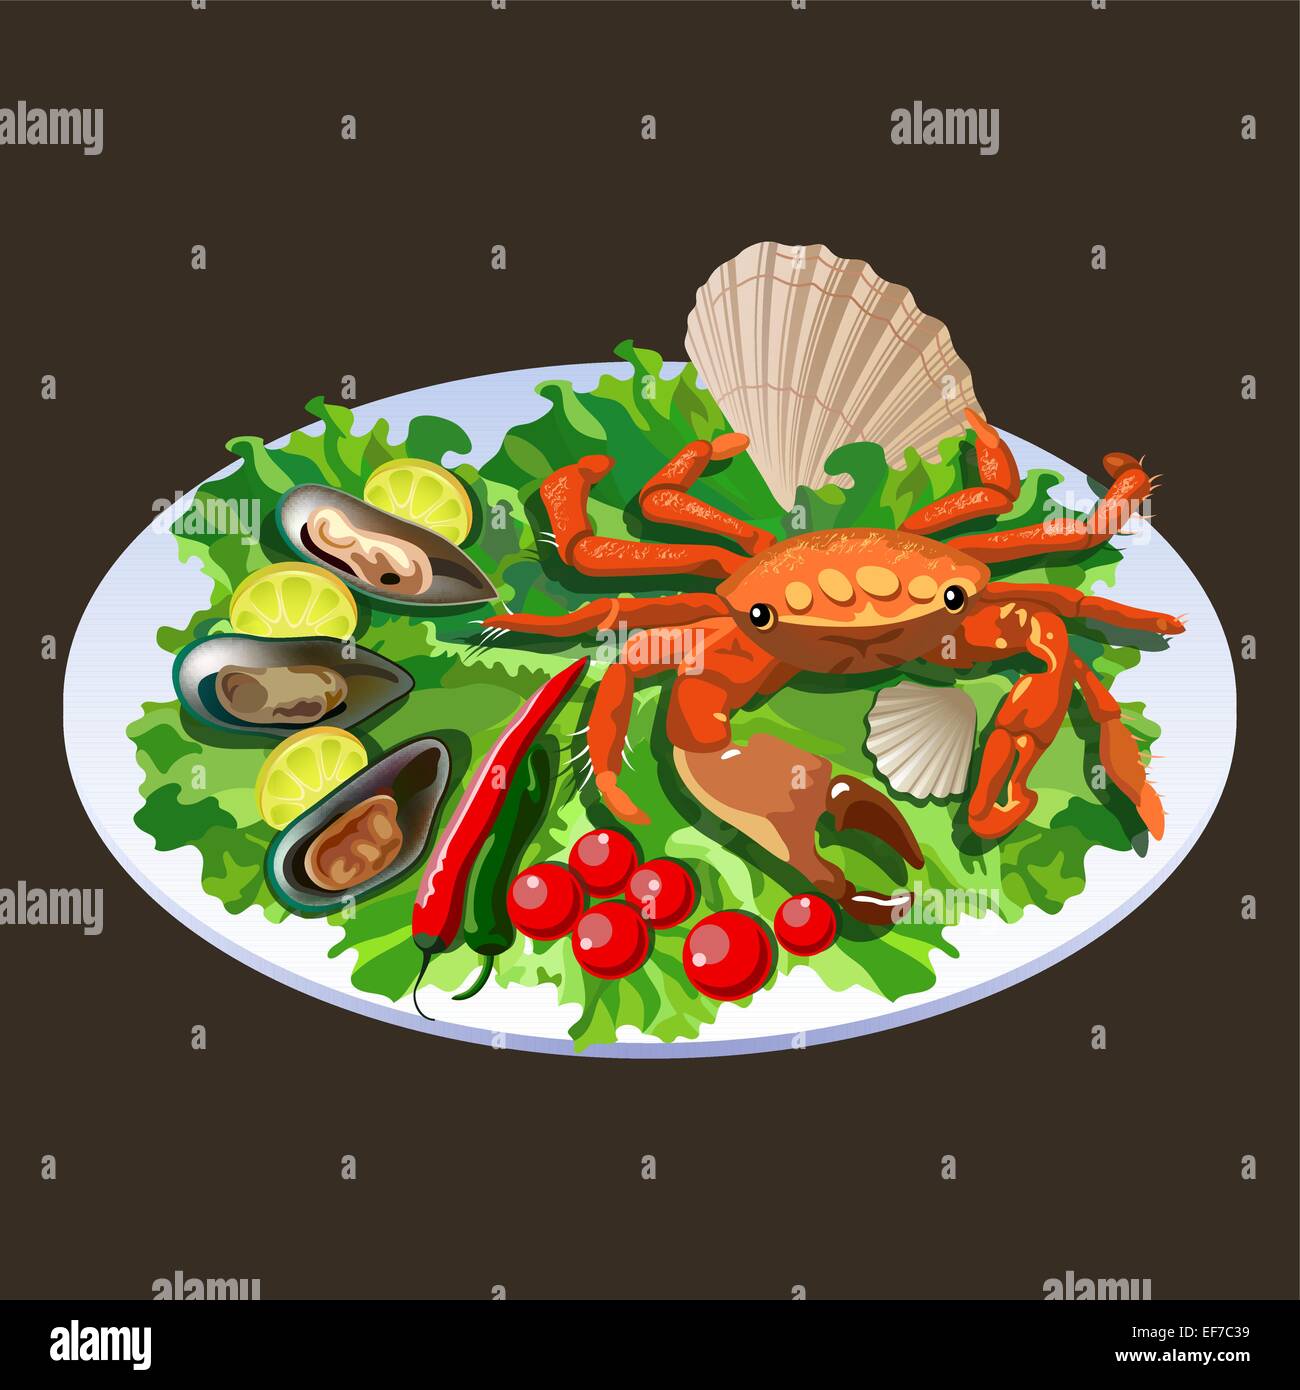 Crab in the dish with salad, tomatos and molluscs with lemon slices Stock Vector